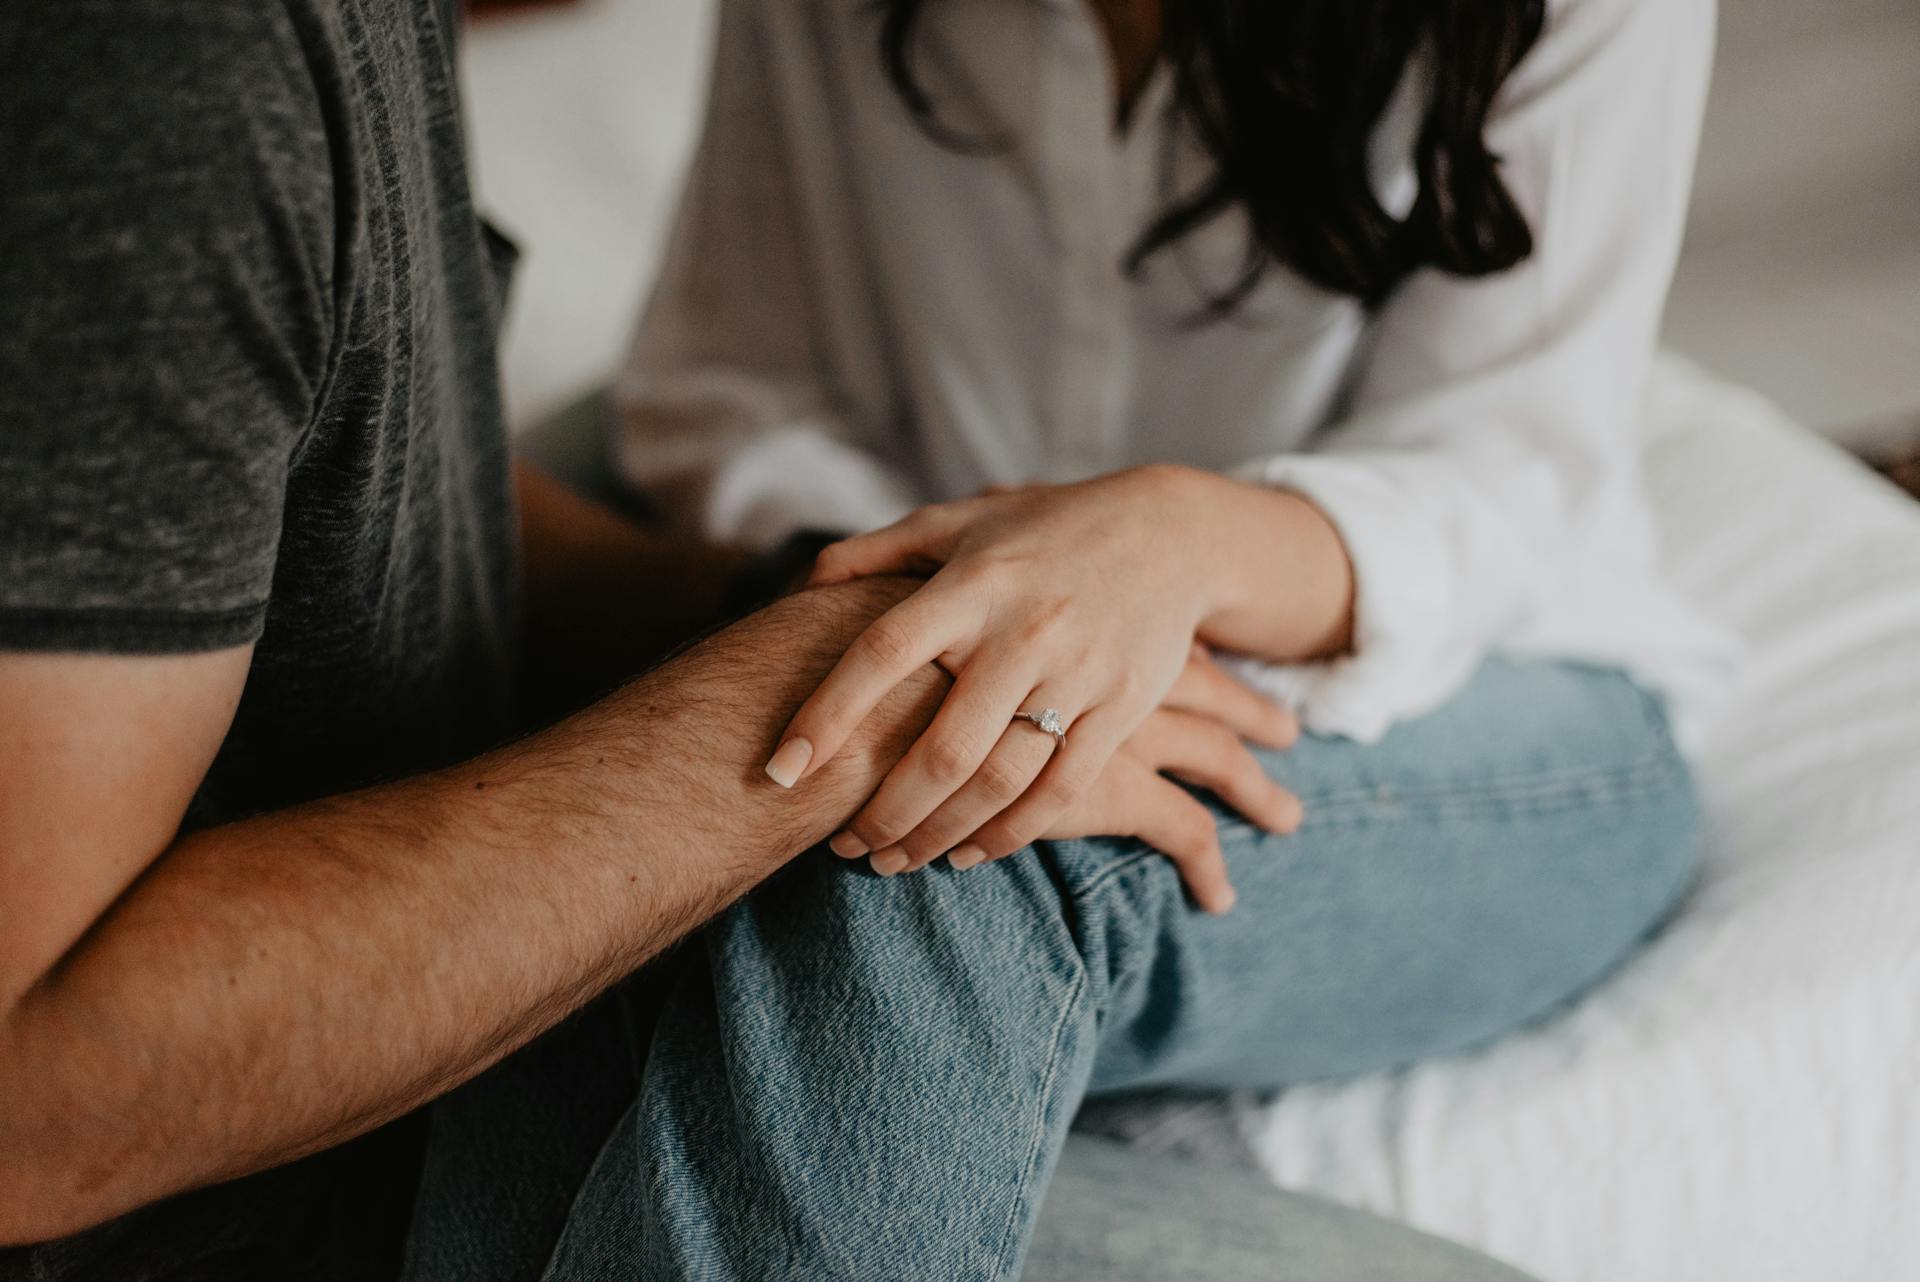 Woman holding man's hand | Source: Pexels